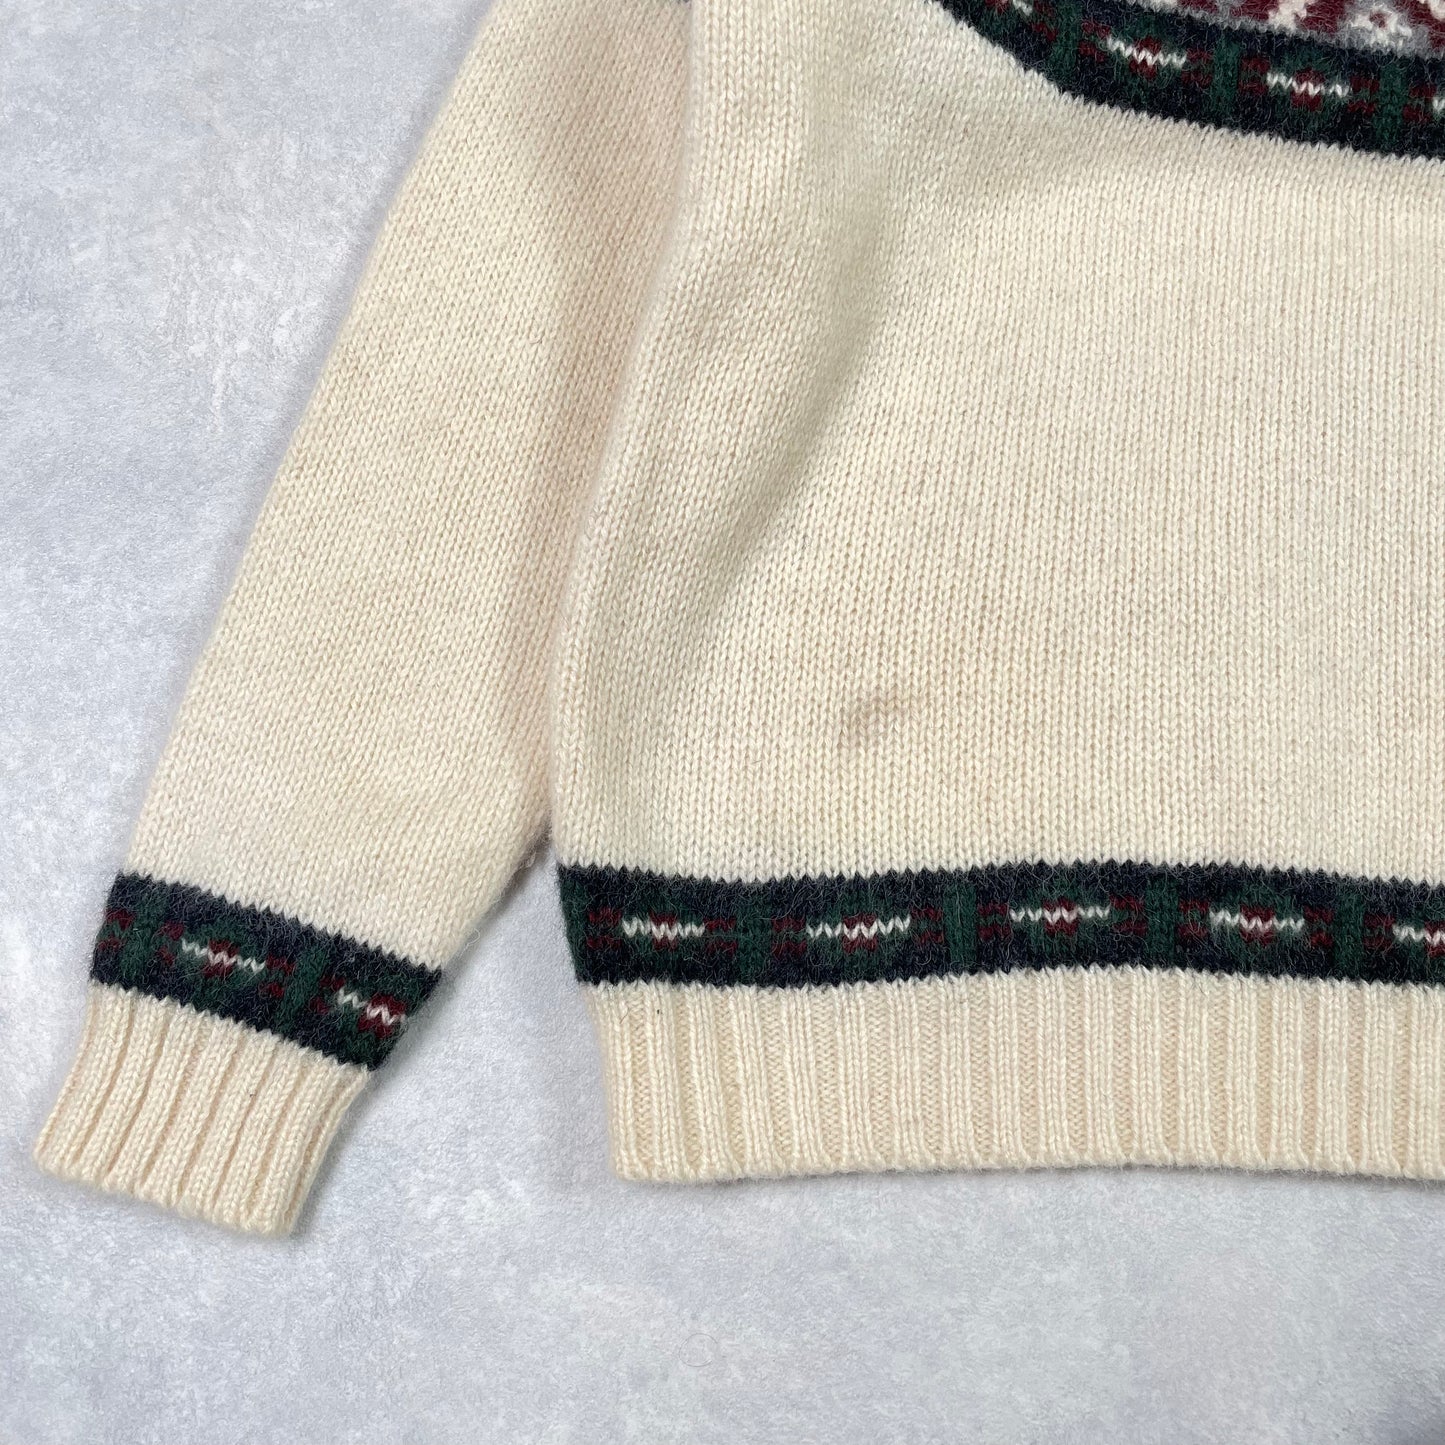 Vintage Woolrich Knit Sweater 70’s Made in USA